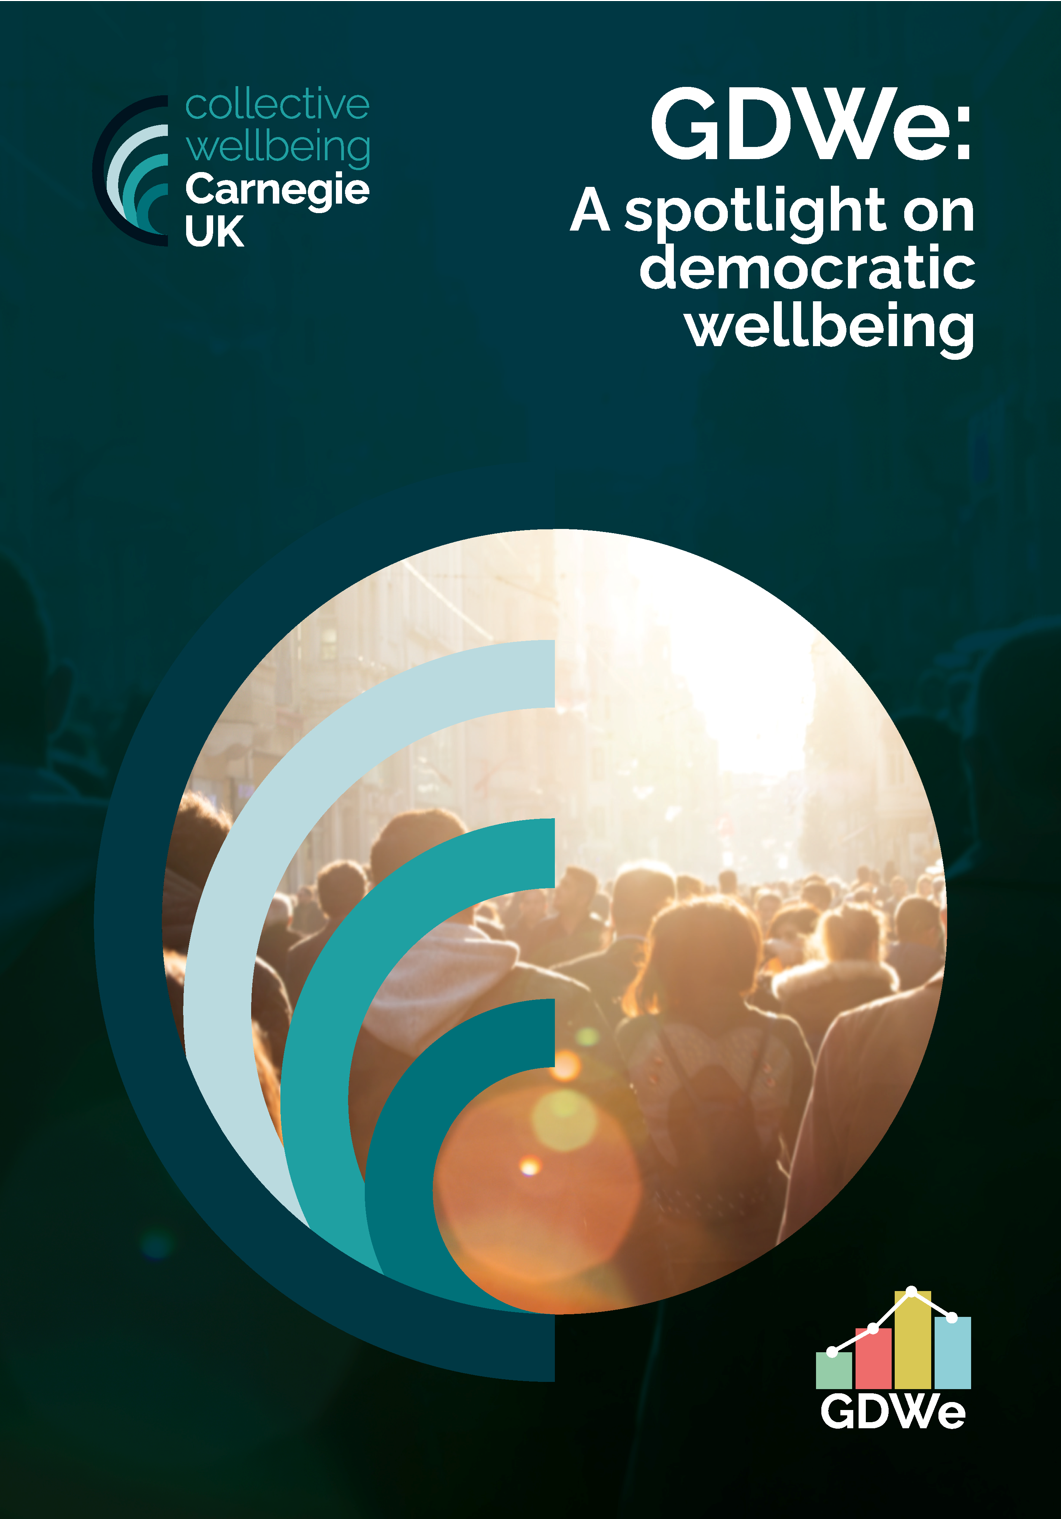 The report puts a spotlight on democratic wellbeing.